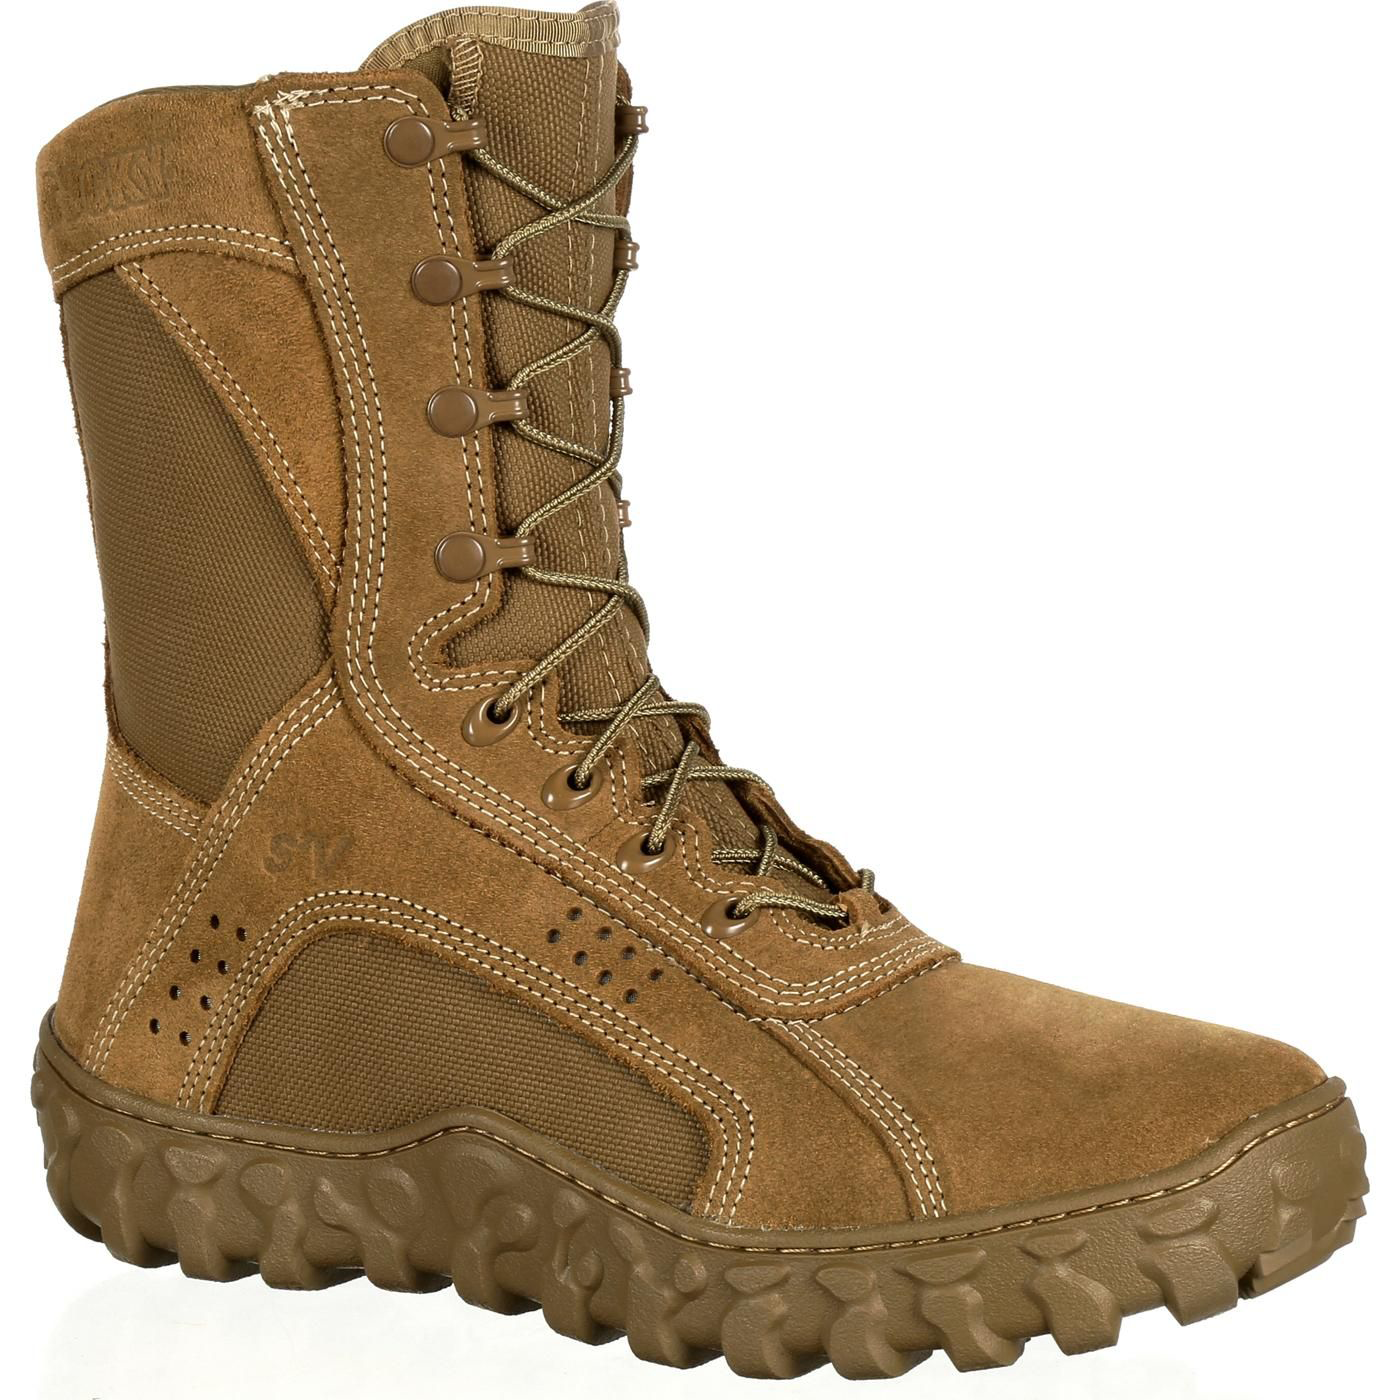 Rocky S2V Tactical Military Boots for Men - Coyote Brown - 6.5M